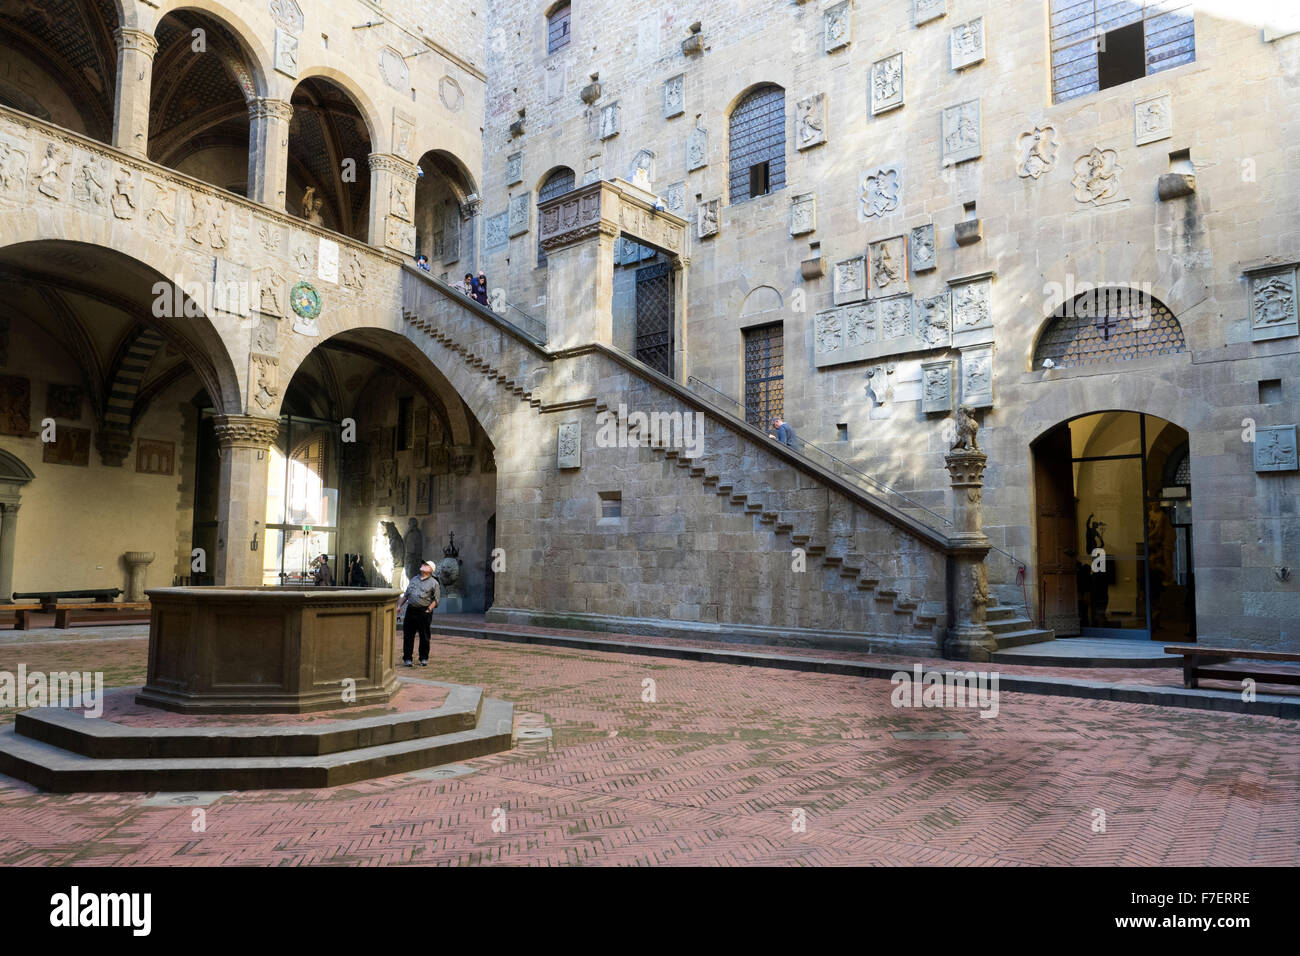 Courtyard in the Museo Nazionale del Bargello - Firenze, Italy Stock Photo